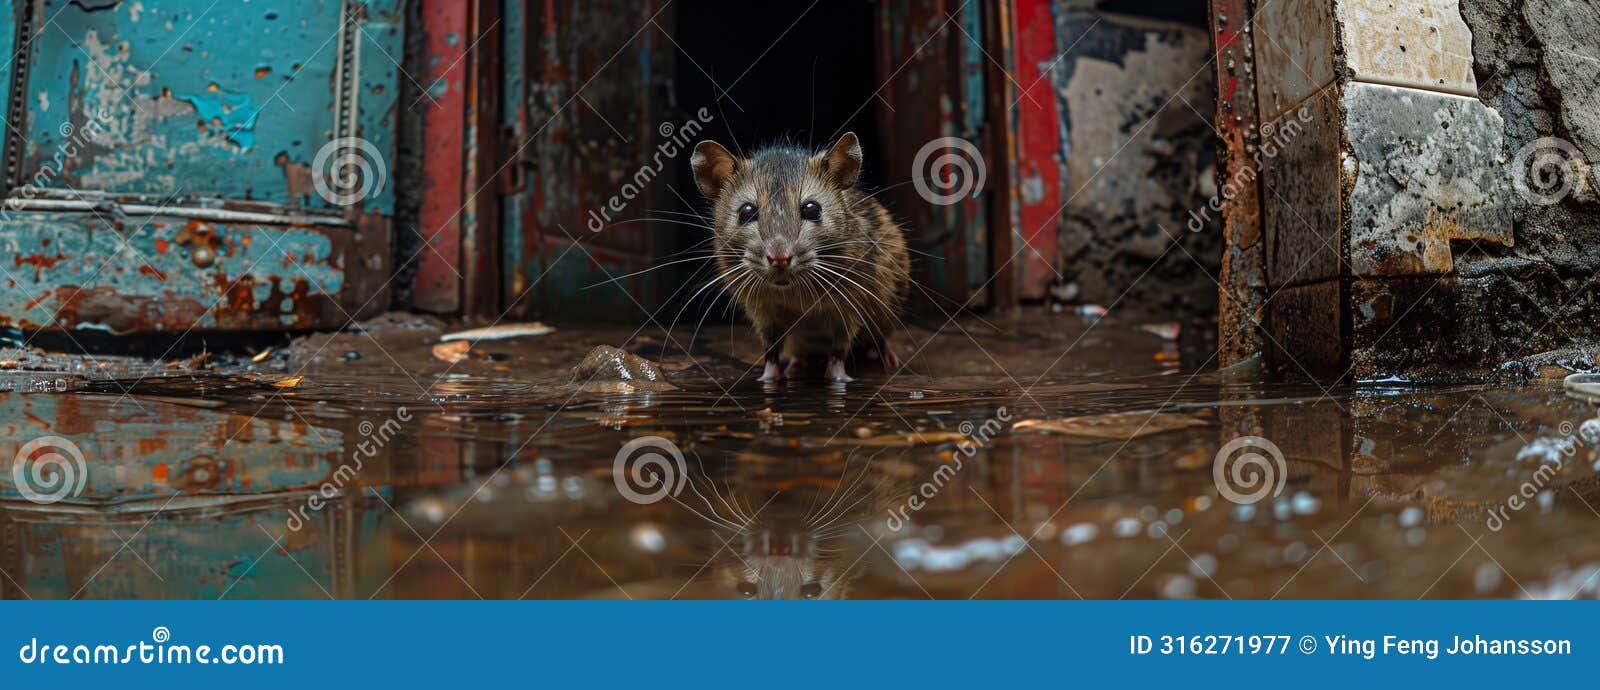 a rat scurries through the shadows of a gritty, decaying industrial landscape.